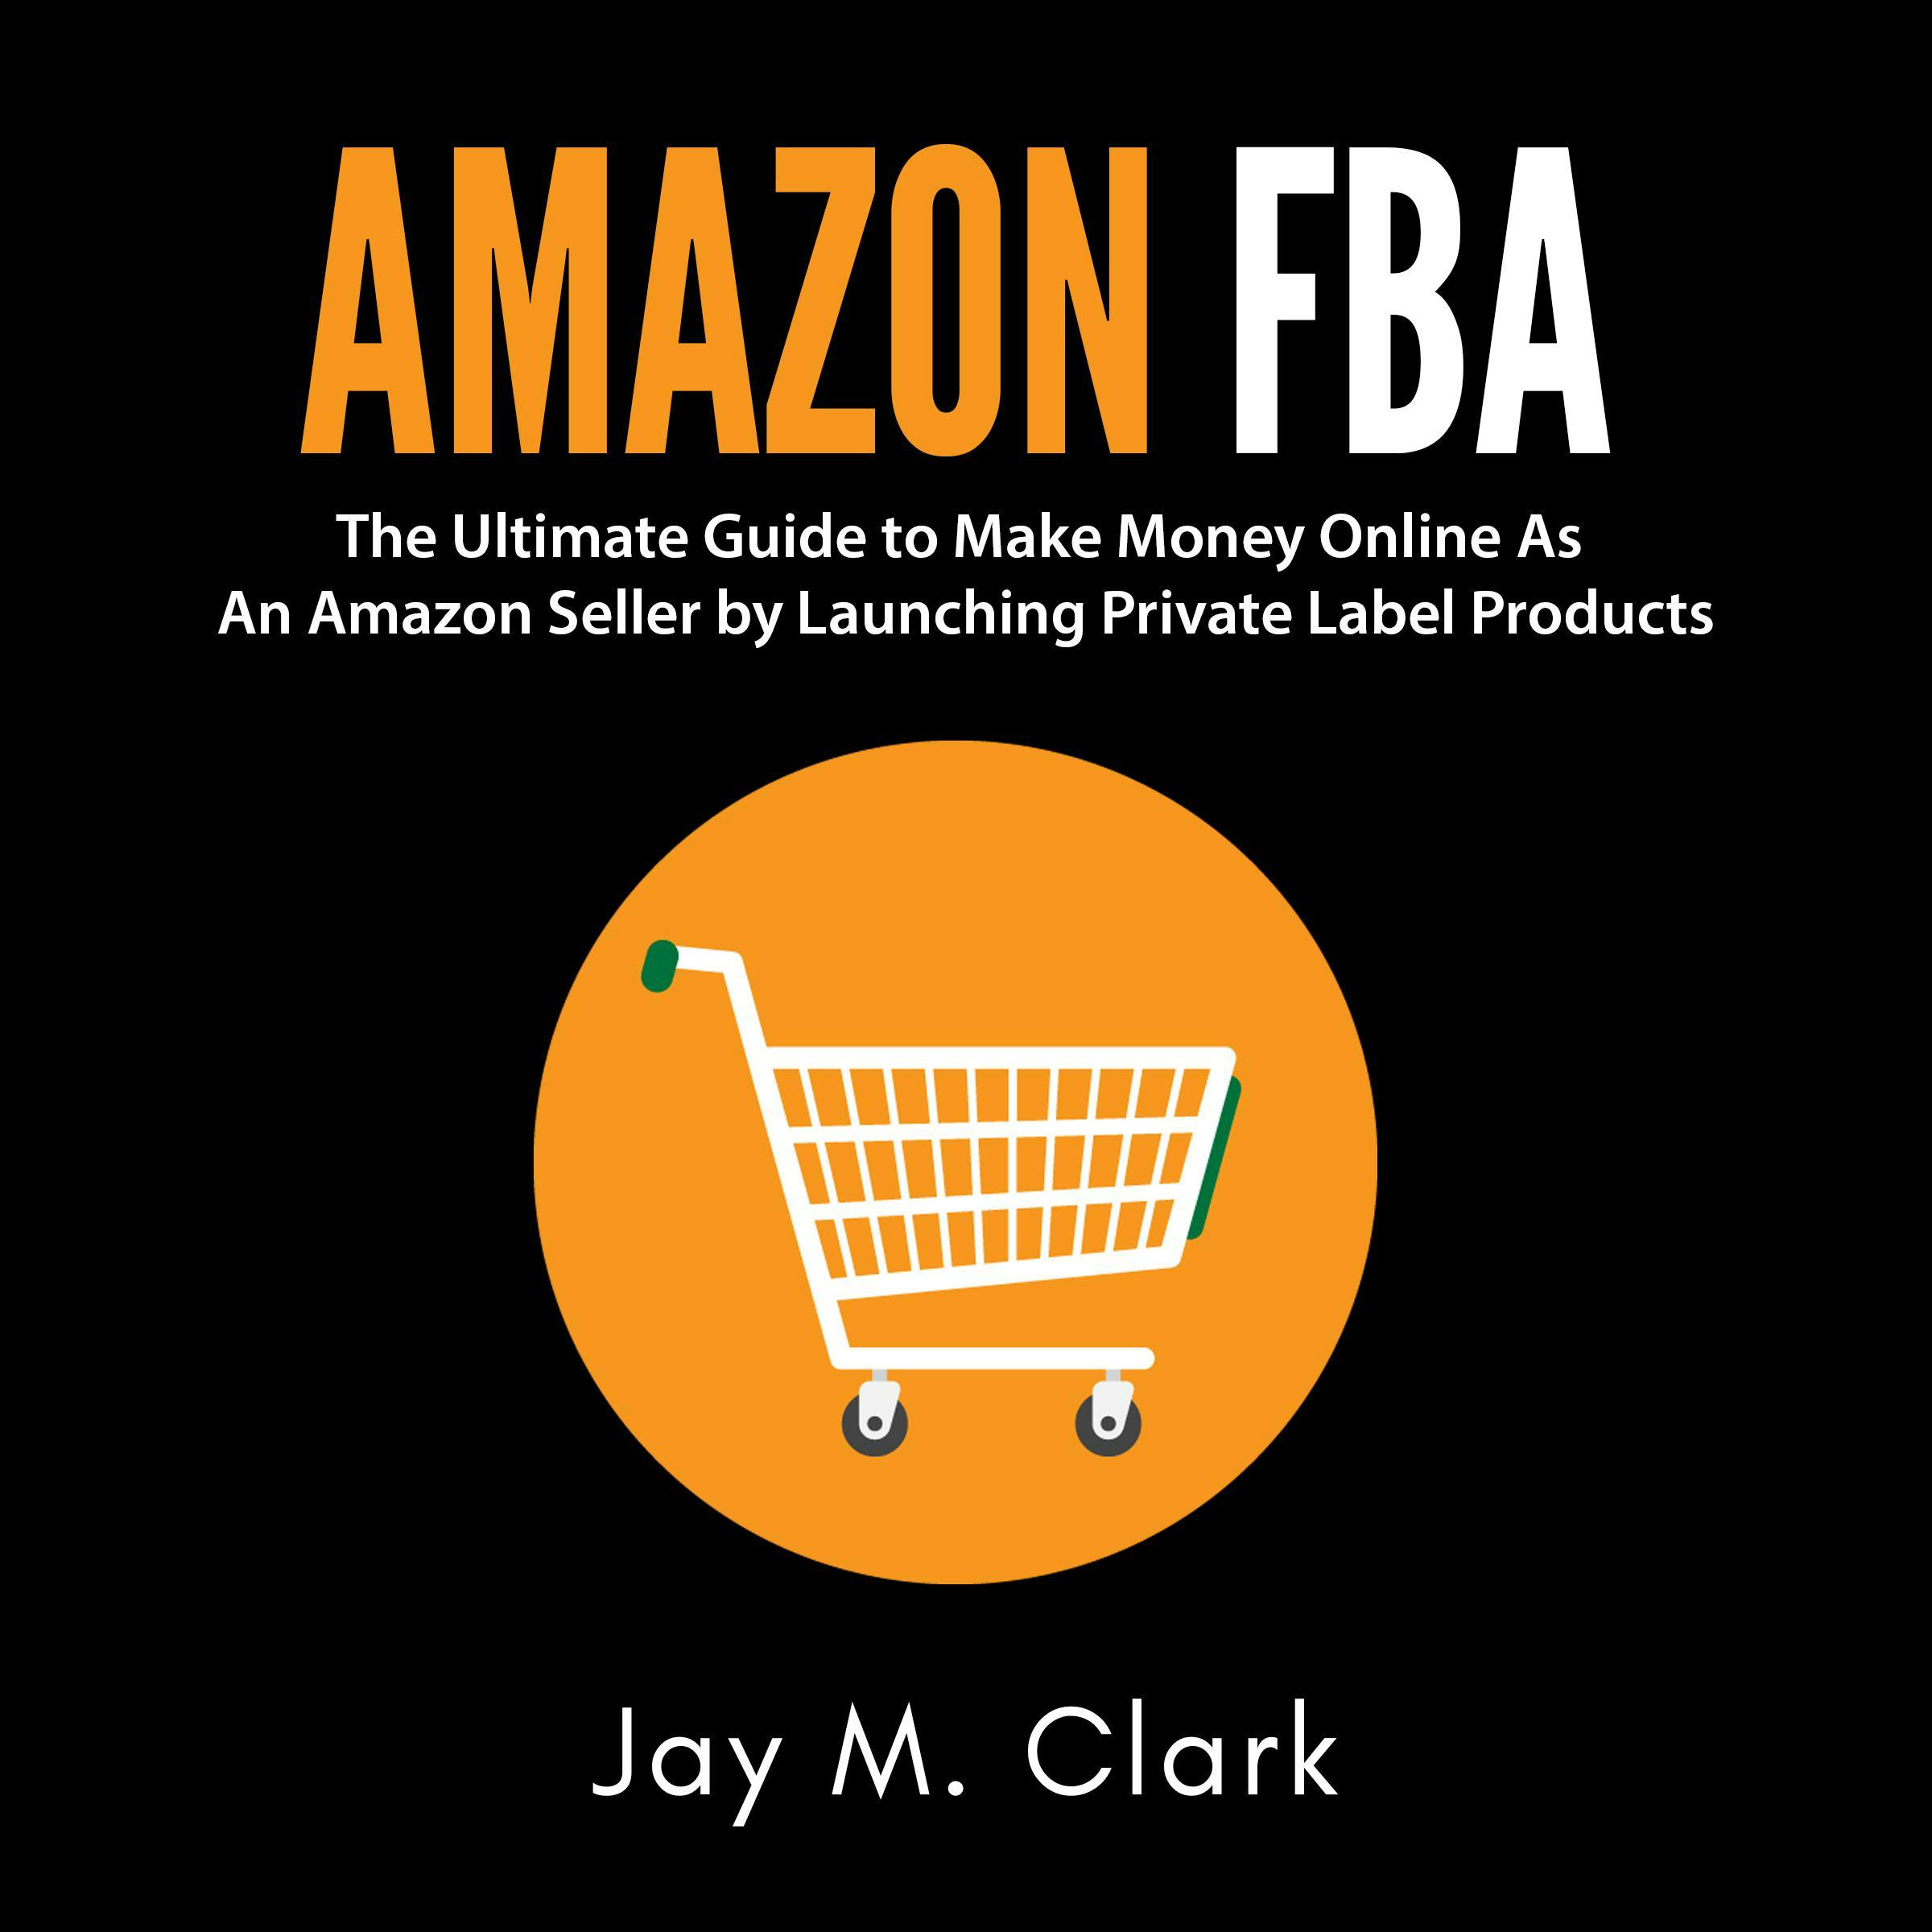 Amazon Fba: The Ultimate Guide to Make Money Online as an Amazon Seller by Launching Private Label Products - Jay M. Clark